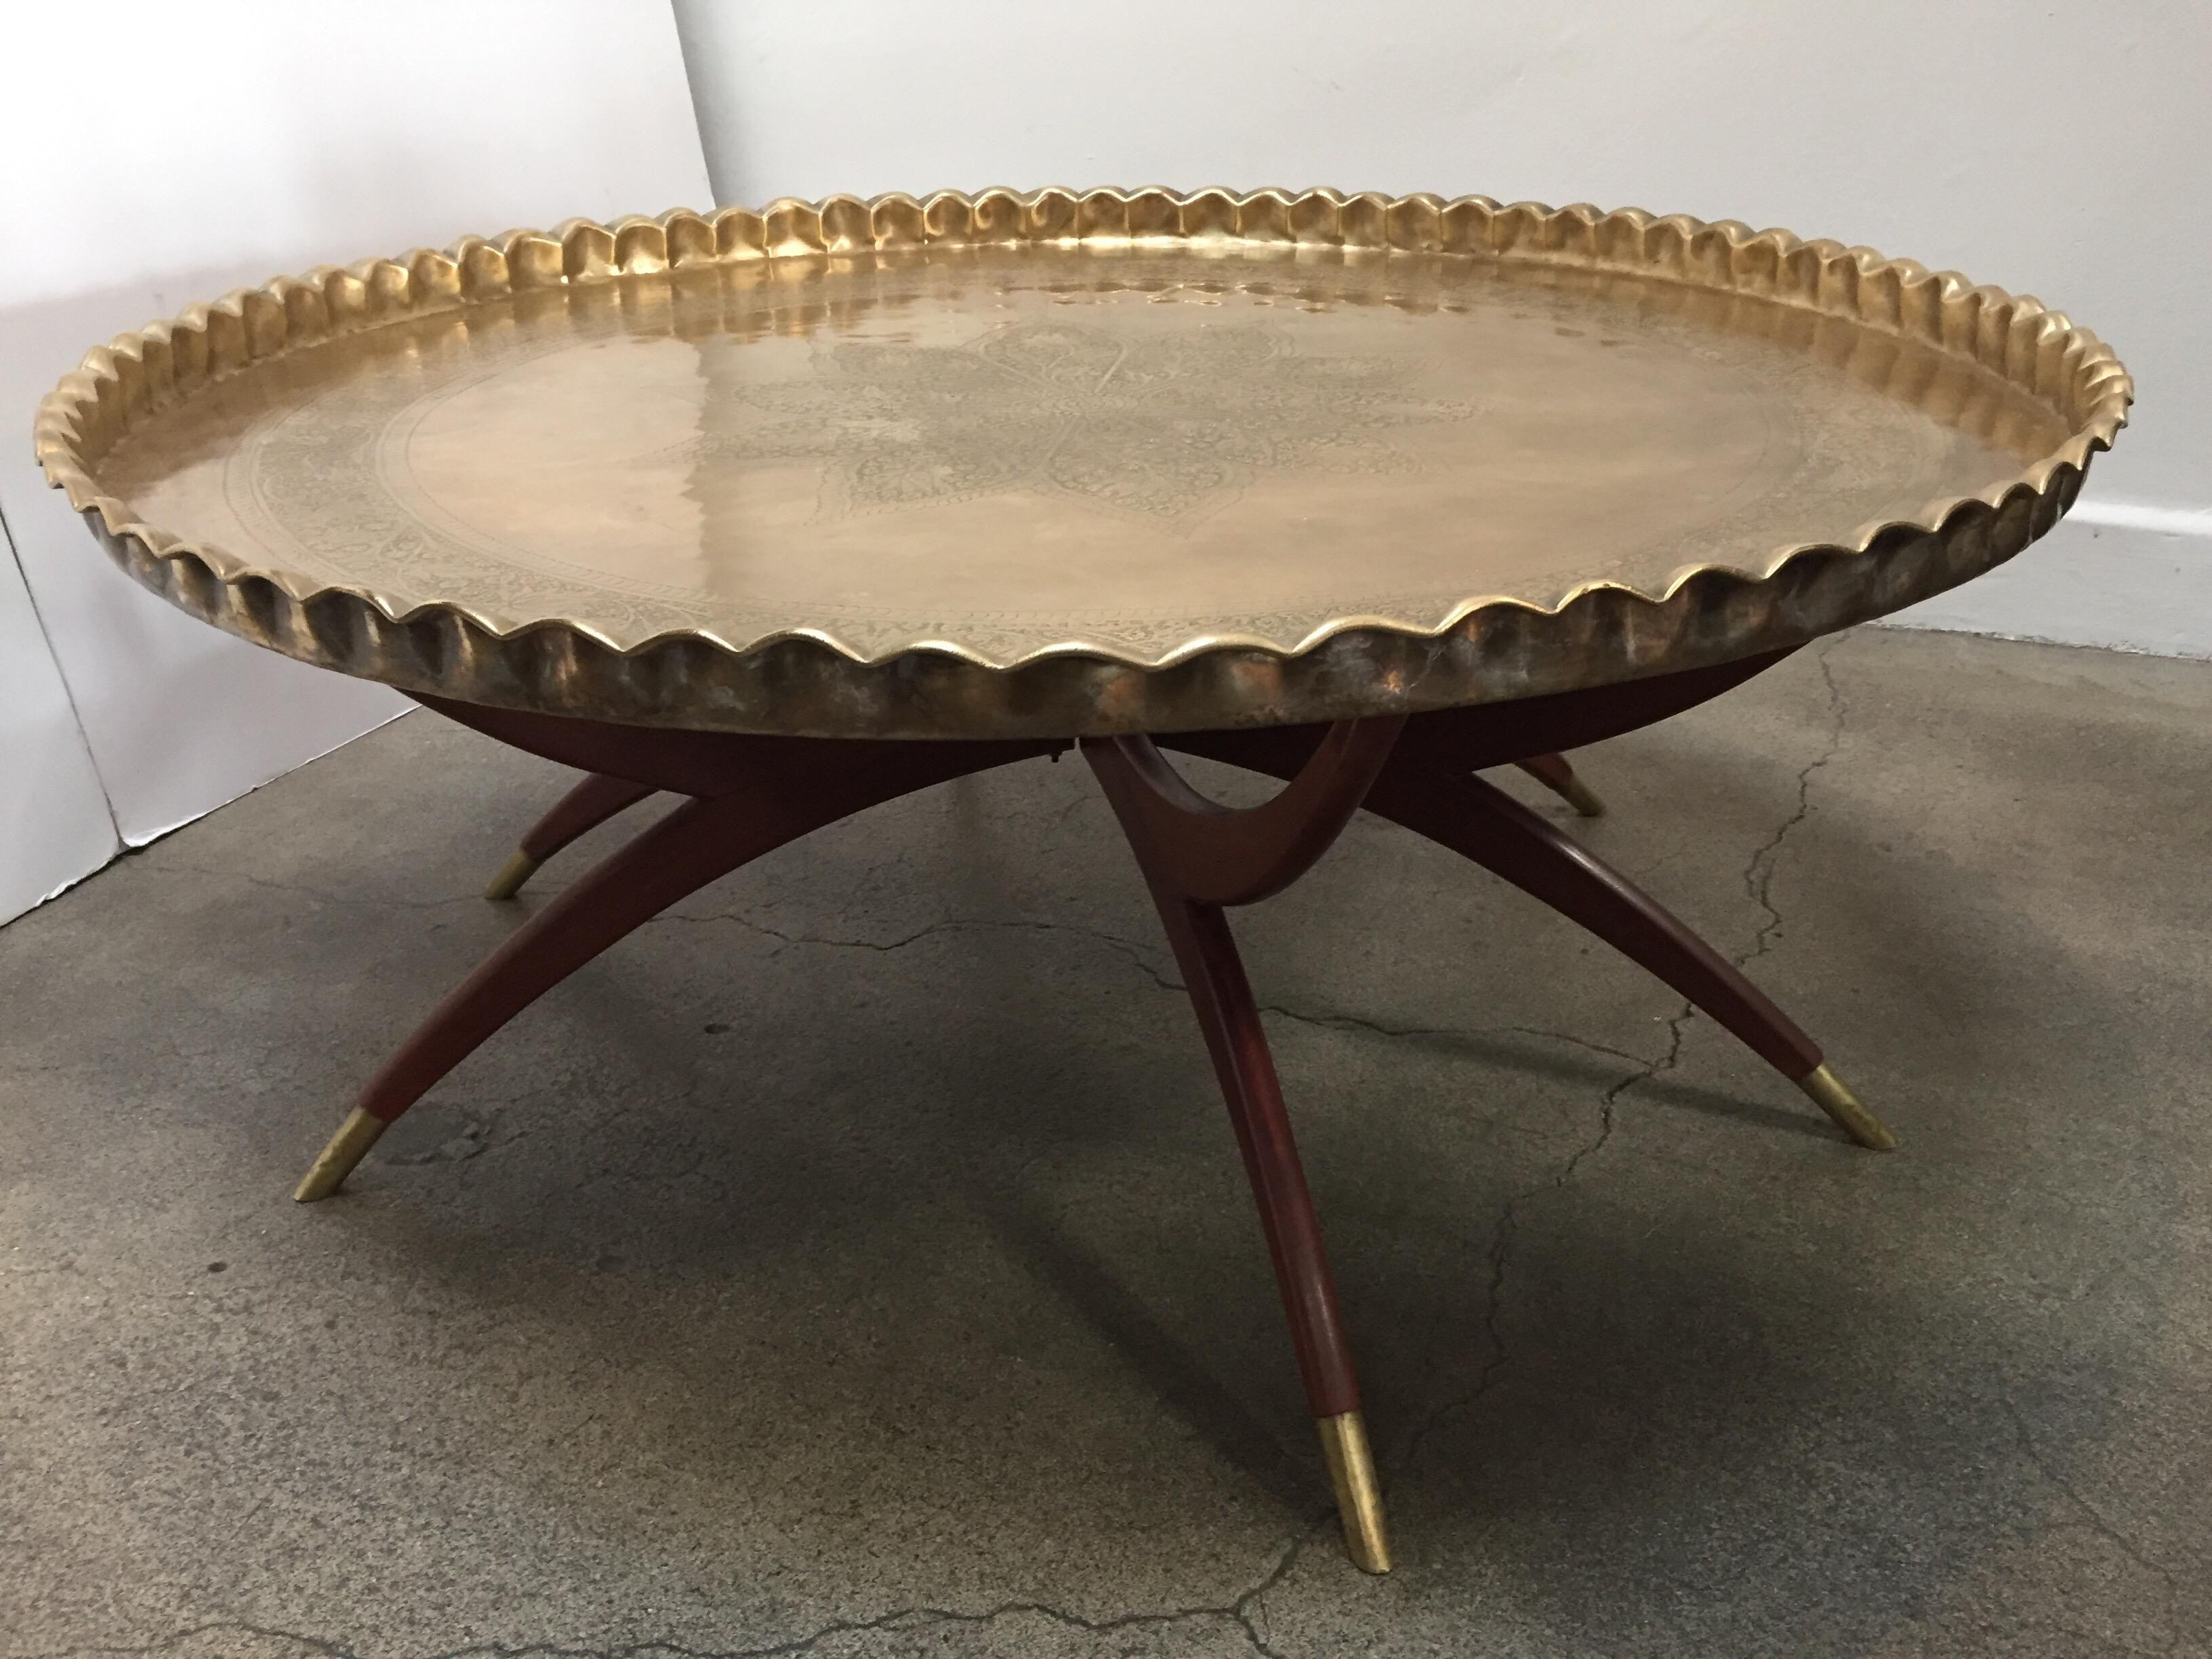 Engraved and embossed large 45 inches round midcentury Anglo Indian brass tray table.
Polished brass Moroccan tray, very good condition, standing on folding mahogany base with six legs.
Very hard to find 45 inches diameter large metal hand-hammered